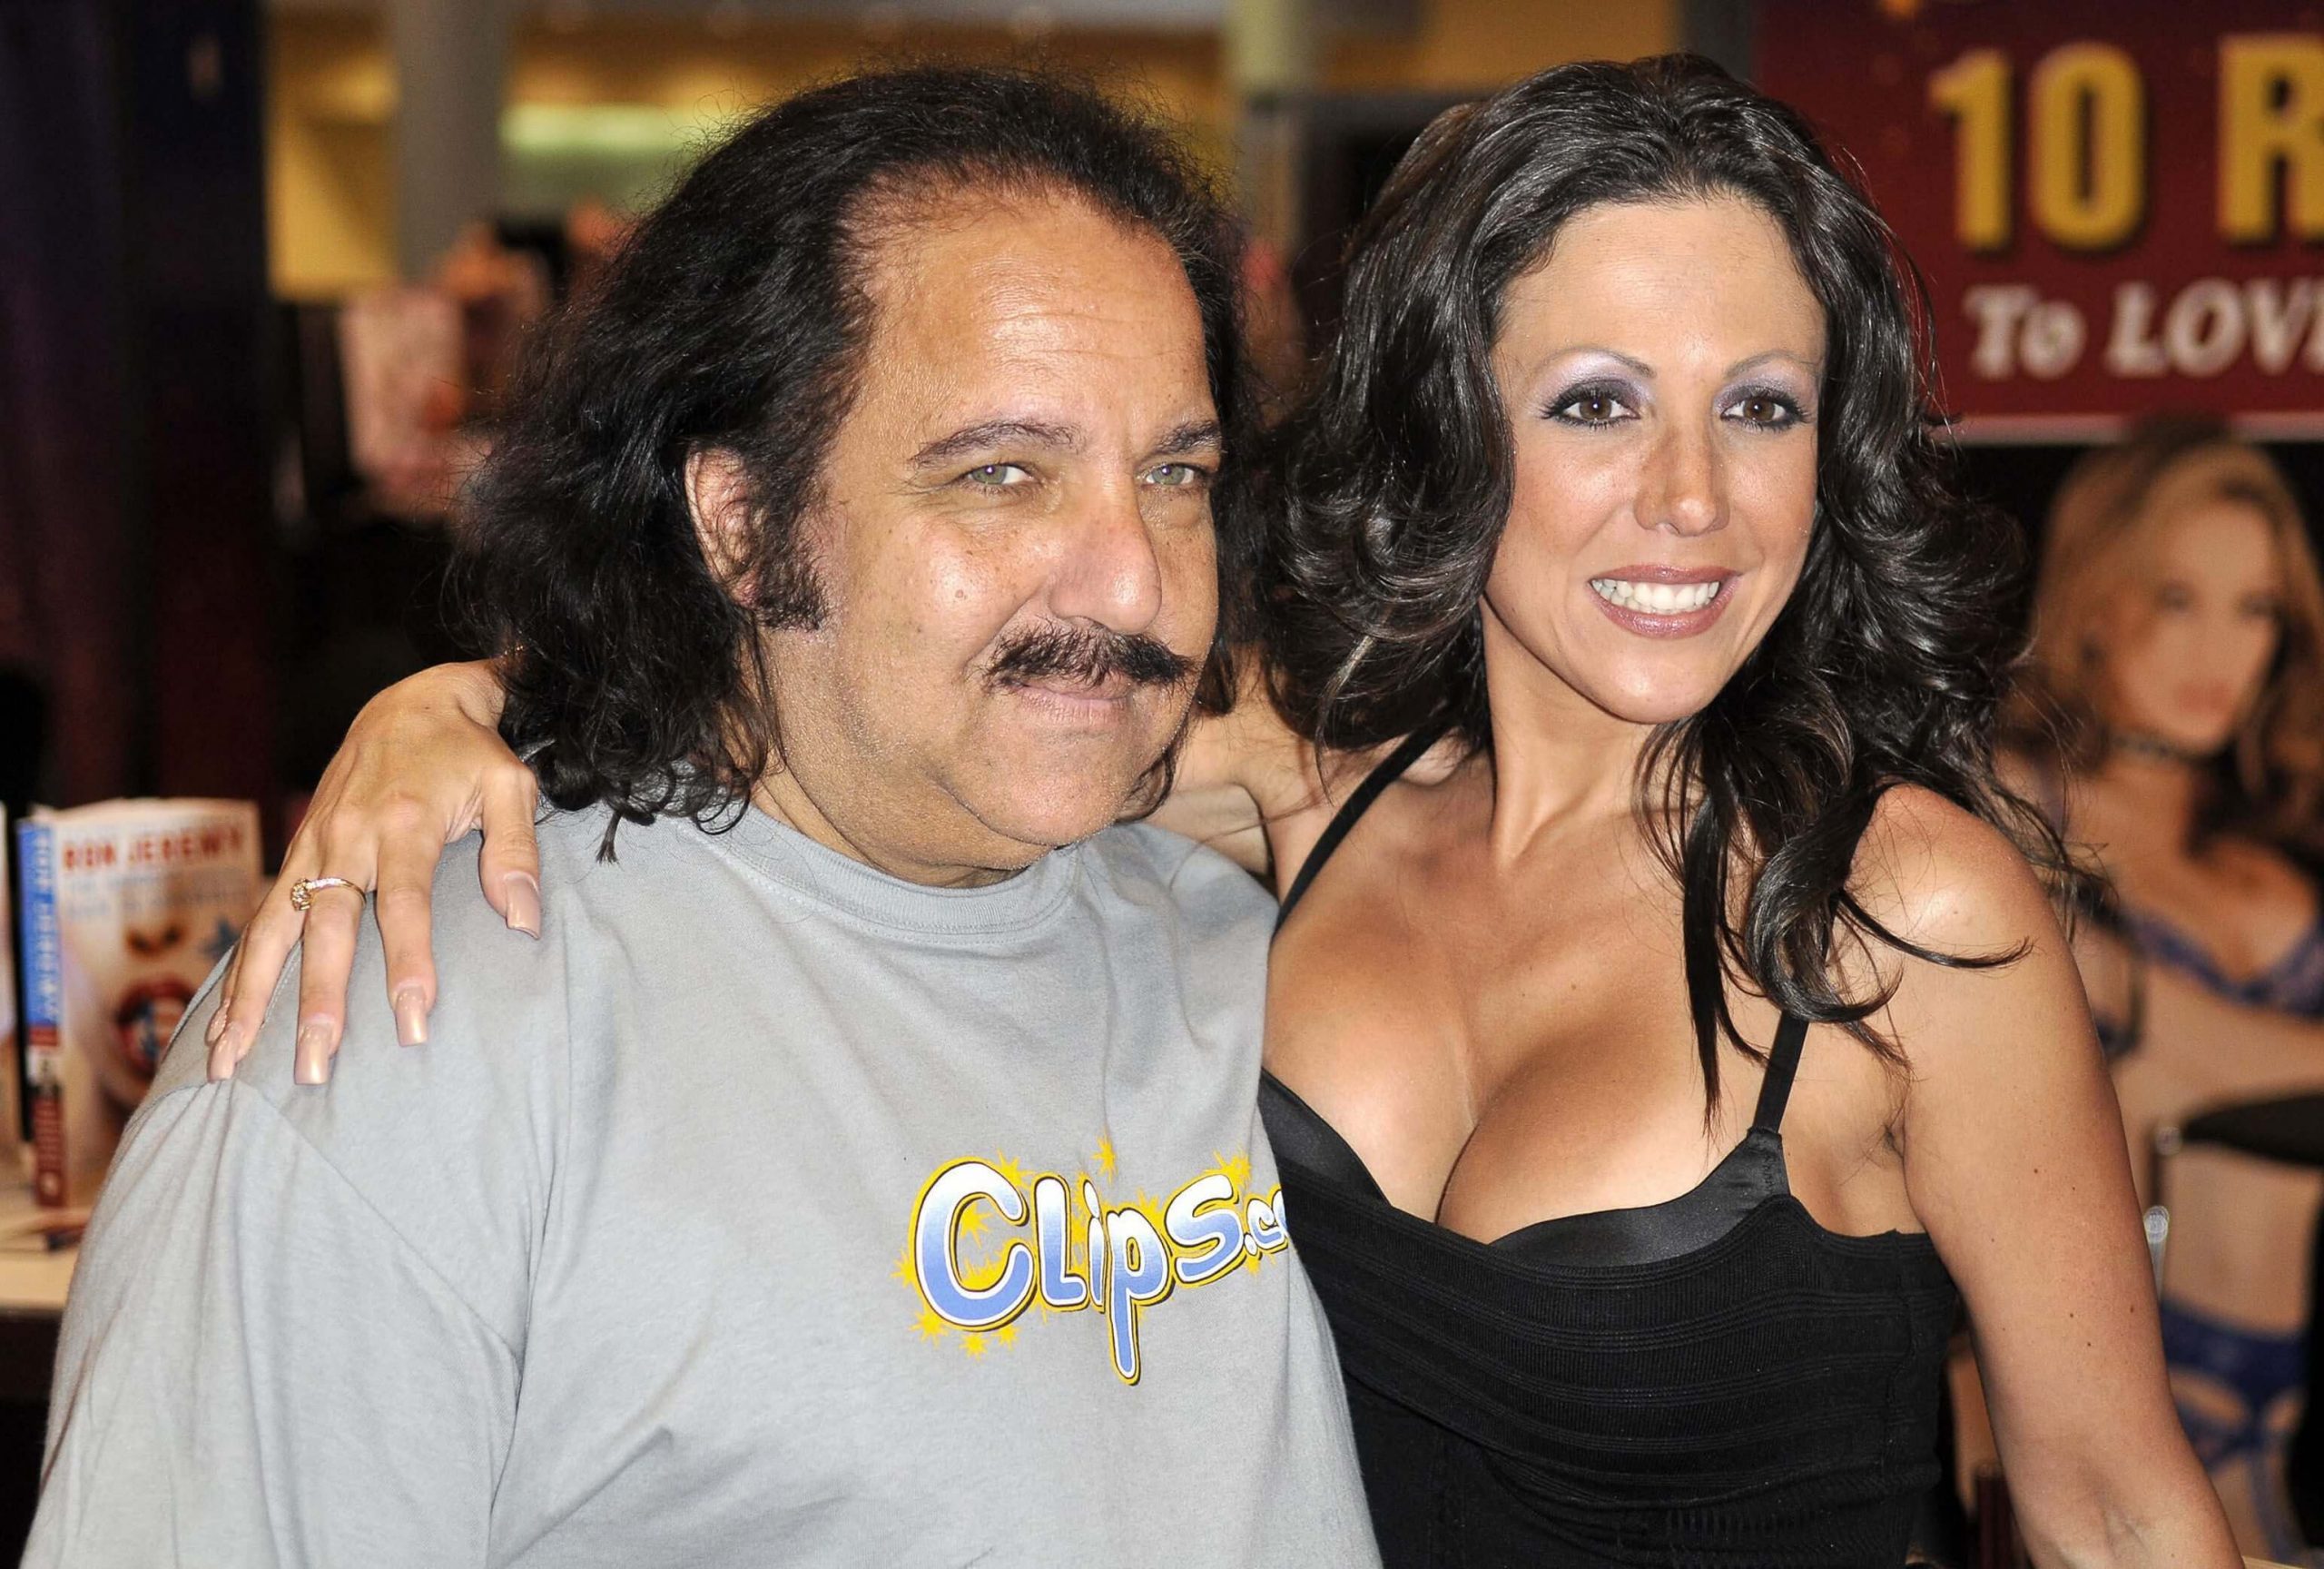 Ron Jeremy - Adult film star charged with rape of 3 women and sexual assault of 1